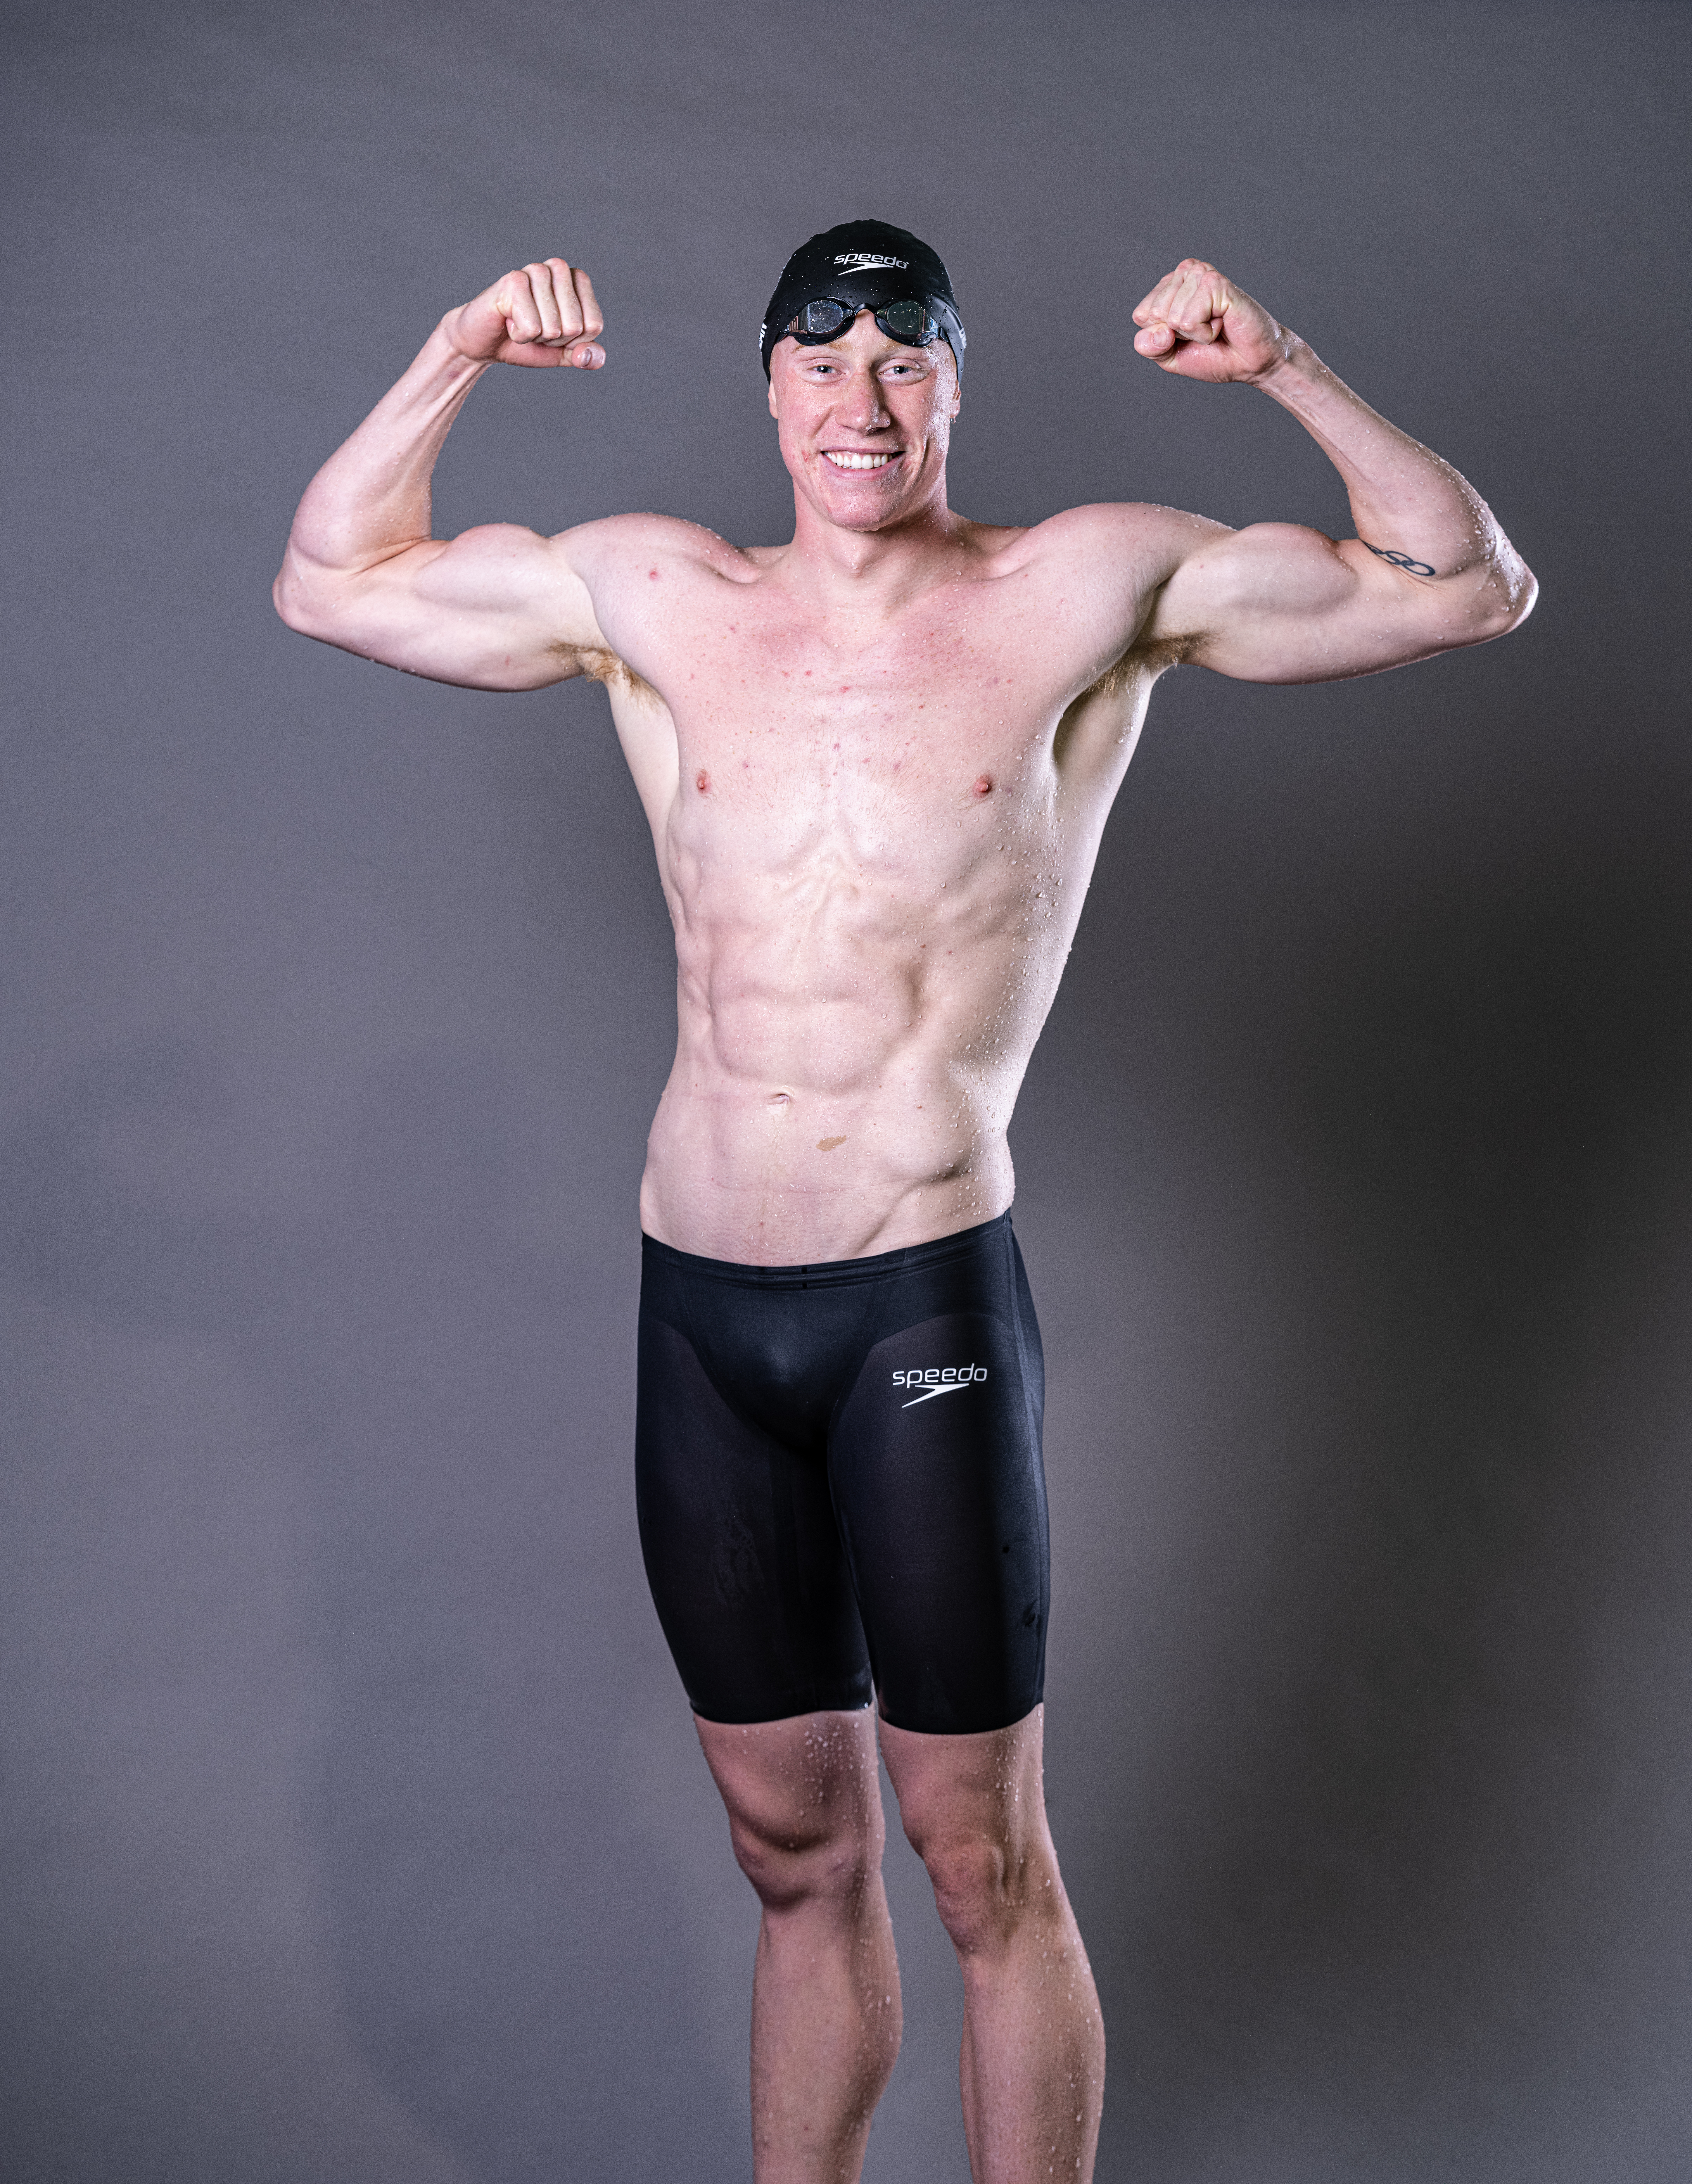 Tom Dean is aiming to make history in retaining his 200m freestyle crown in Paris